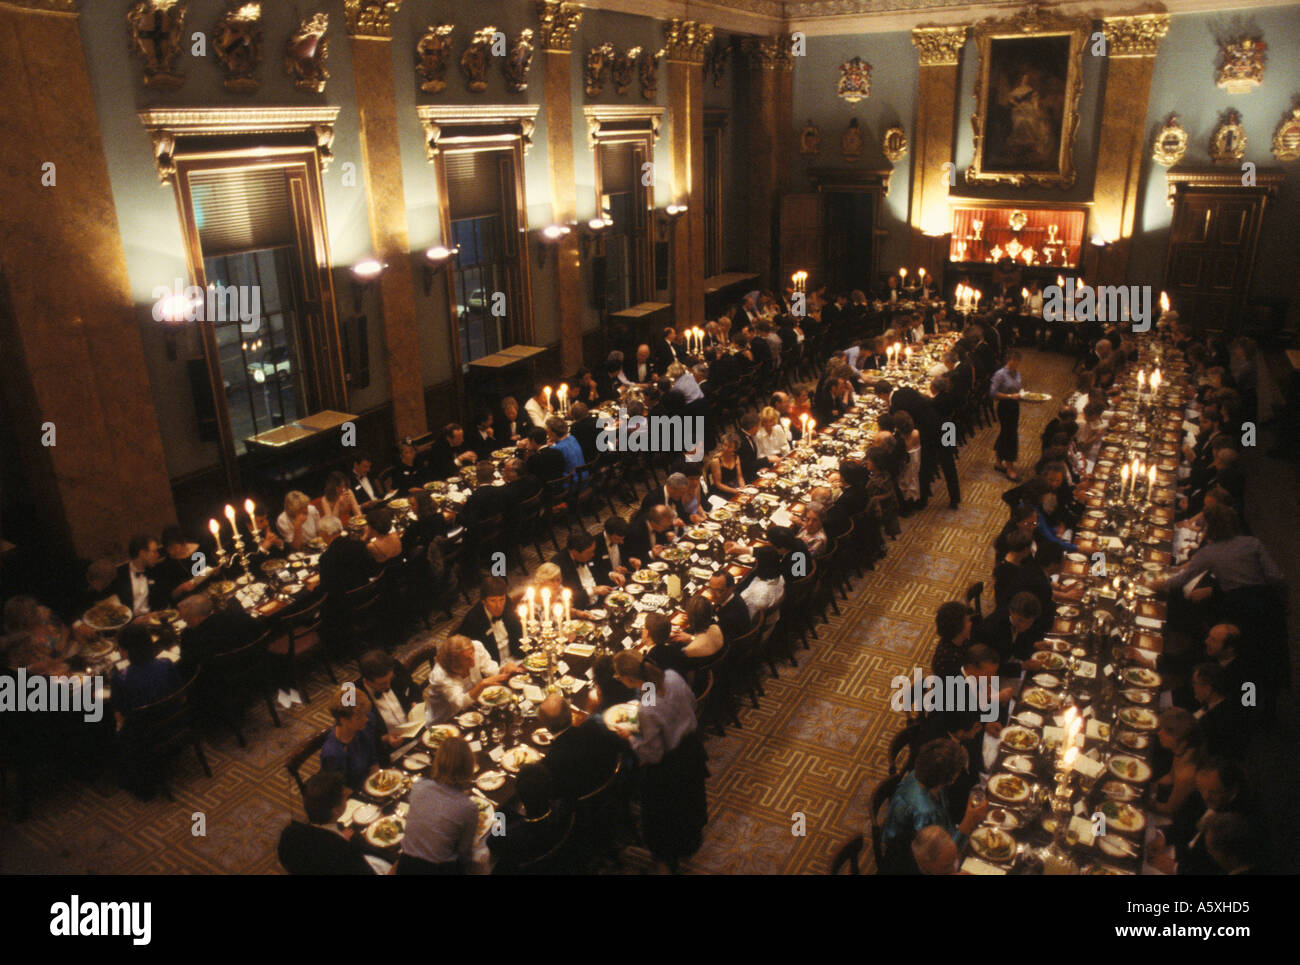 Fishmongers Hall the City of London Livery Company.  Worshipful Company of Fishmongers hold a  banquet for the fish trade HOMER SYKES Stock Photo